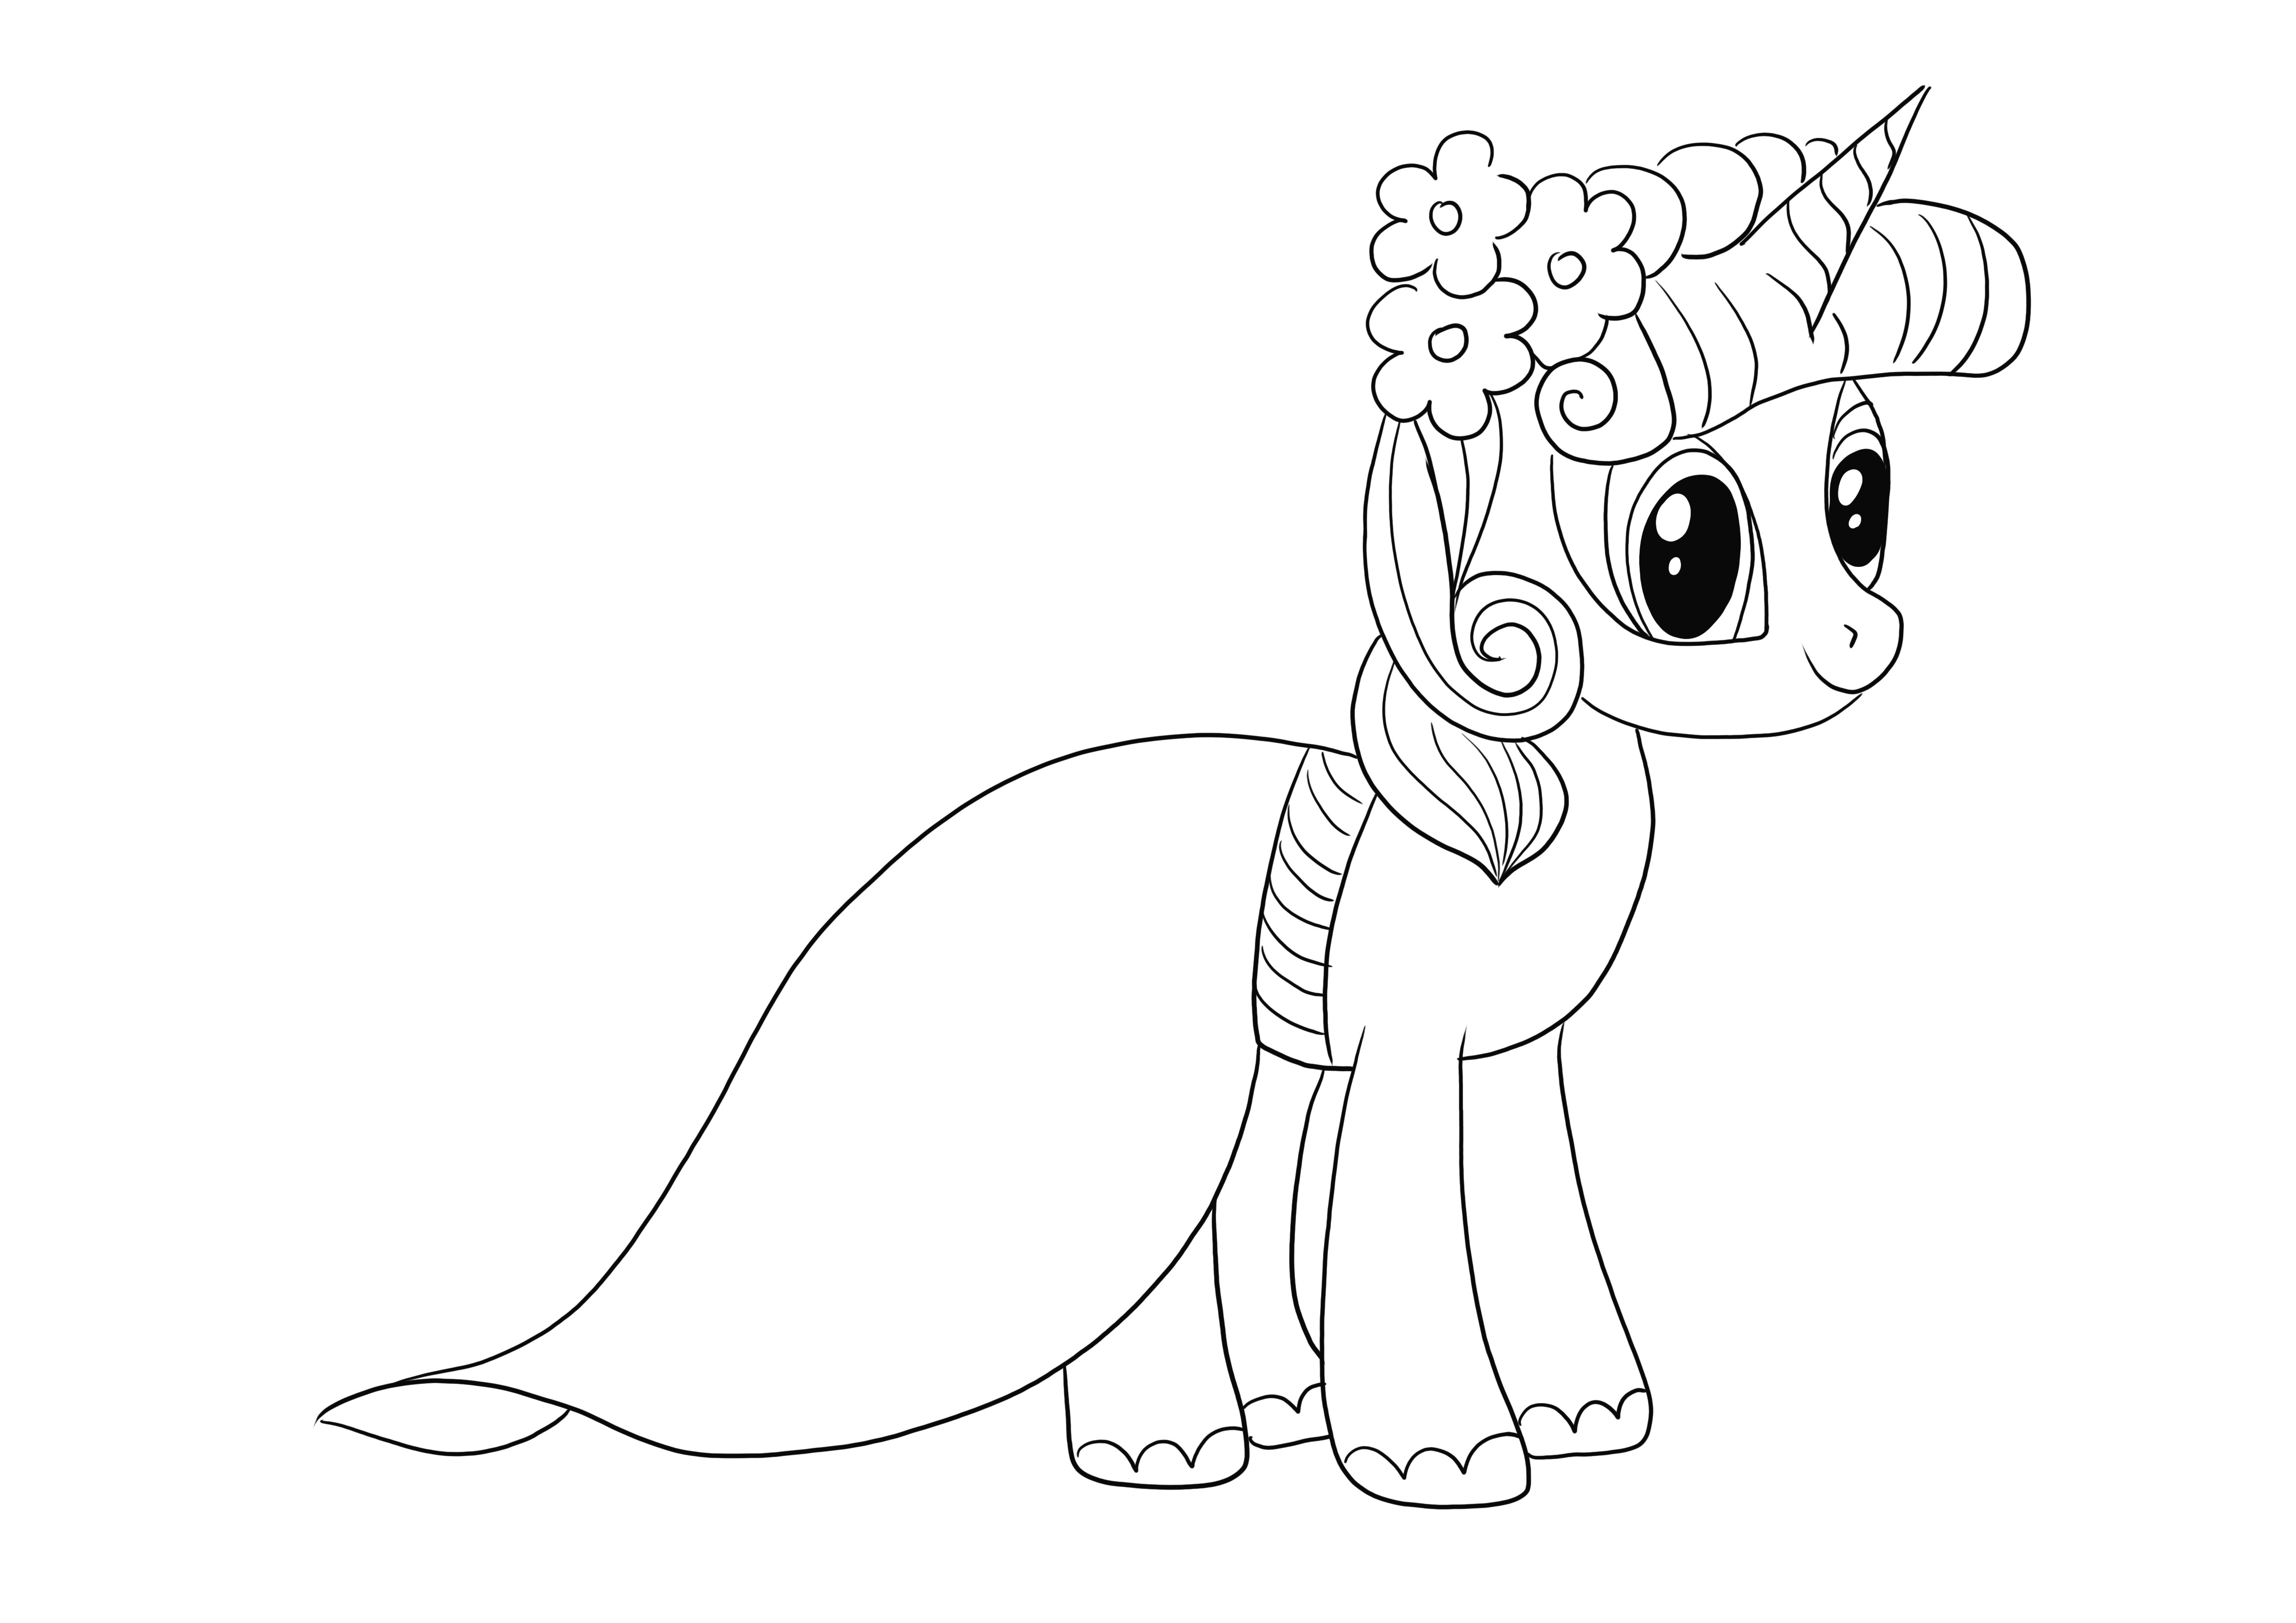 Princess Twilight Sparkle coloring sheet free to download or print